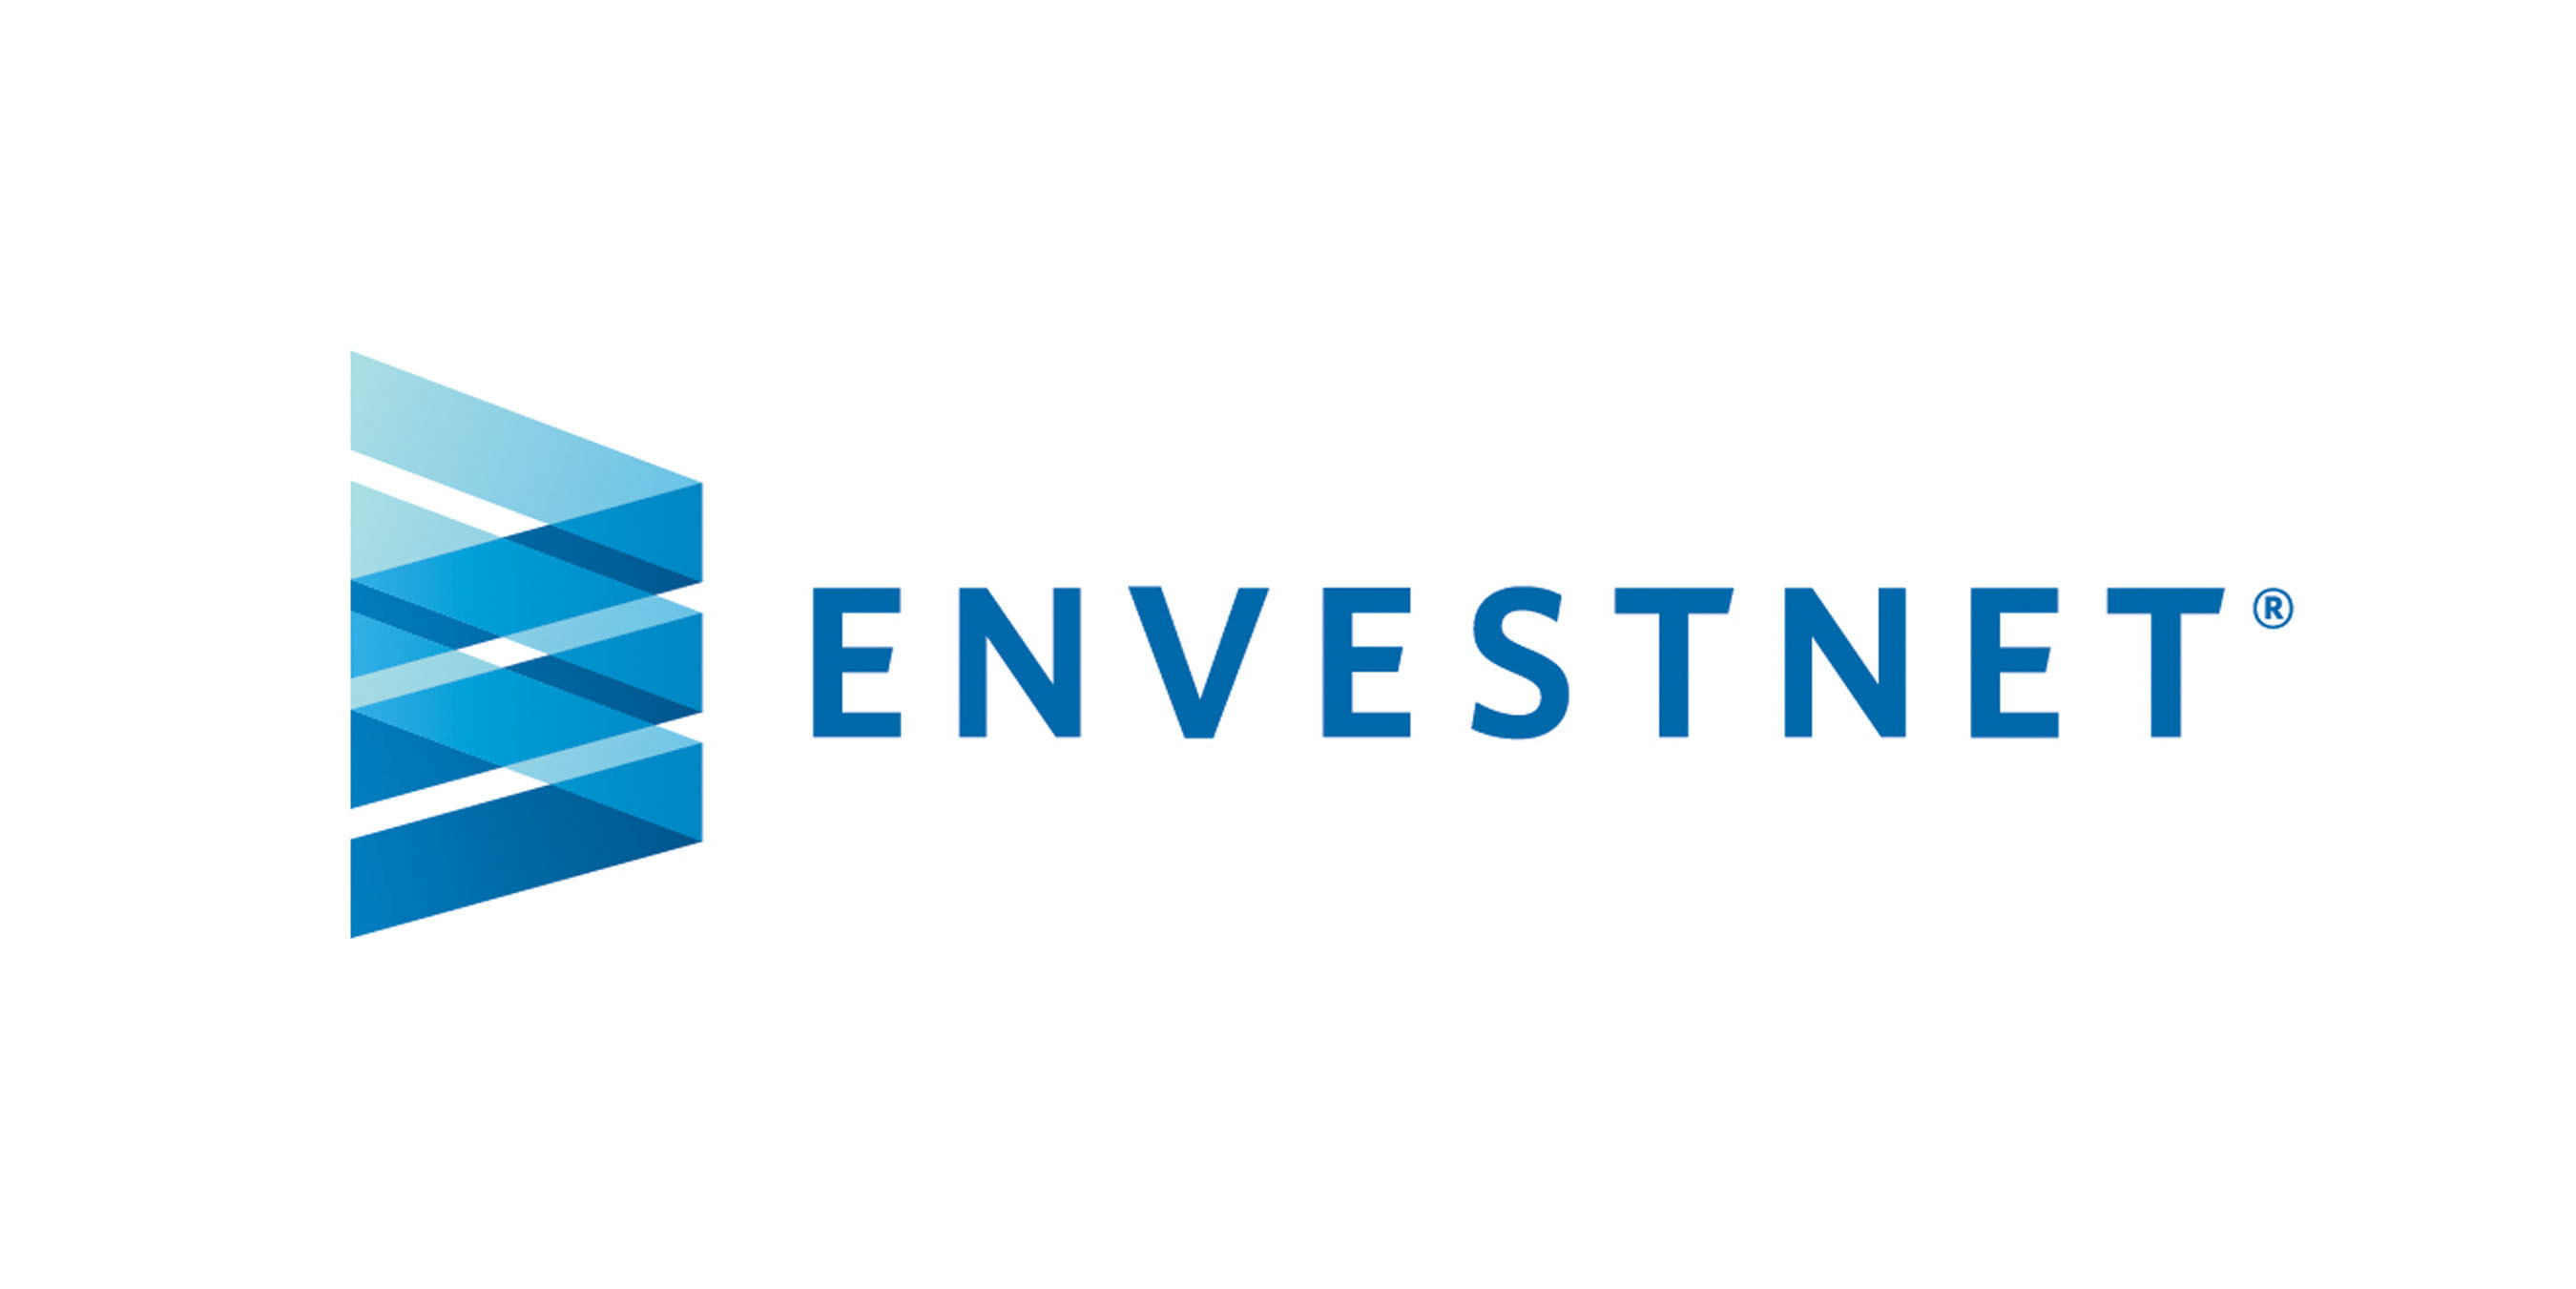 Envestnet, Inc. (ENV) is a leading provider of unified wealth management technology and services to investment advisors. Our open-architecture platforms unify and fortify the wealth management process, delivering unparalleled flexibility, accuracy, performance and value. Envestnet solutions enable the transformation of wealth management into a transparent, independent, objective and fully-aligned standard of care, and empower advisors to deliver better outcomes. For more information on Envestnet, please visit  www.envestnet.com . (PRNewsFoto/Envestnet, Inc.)